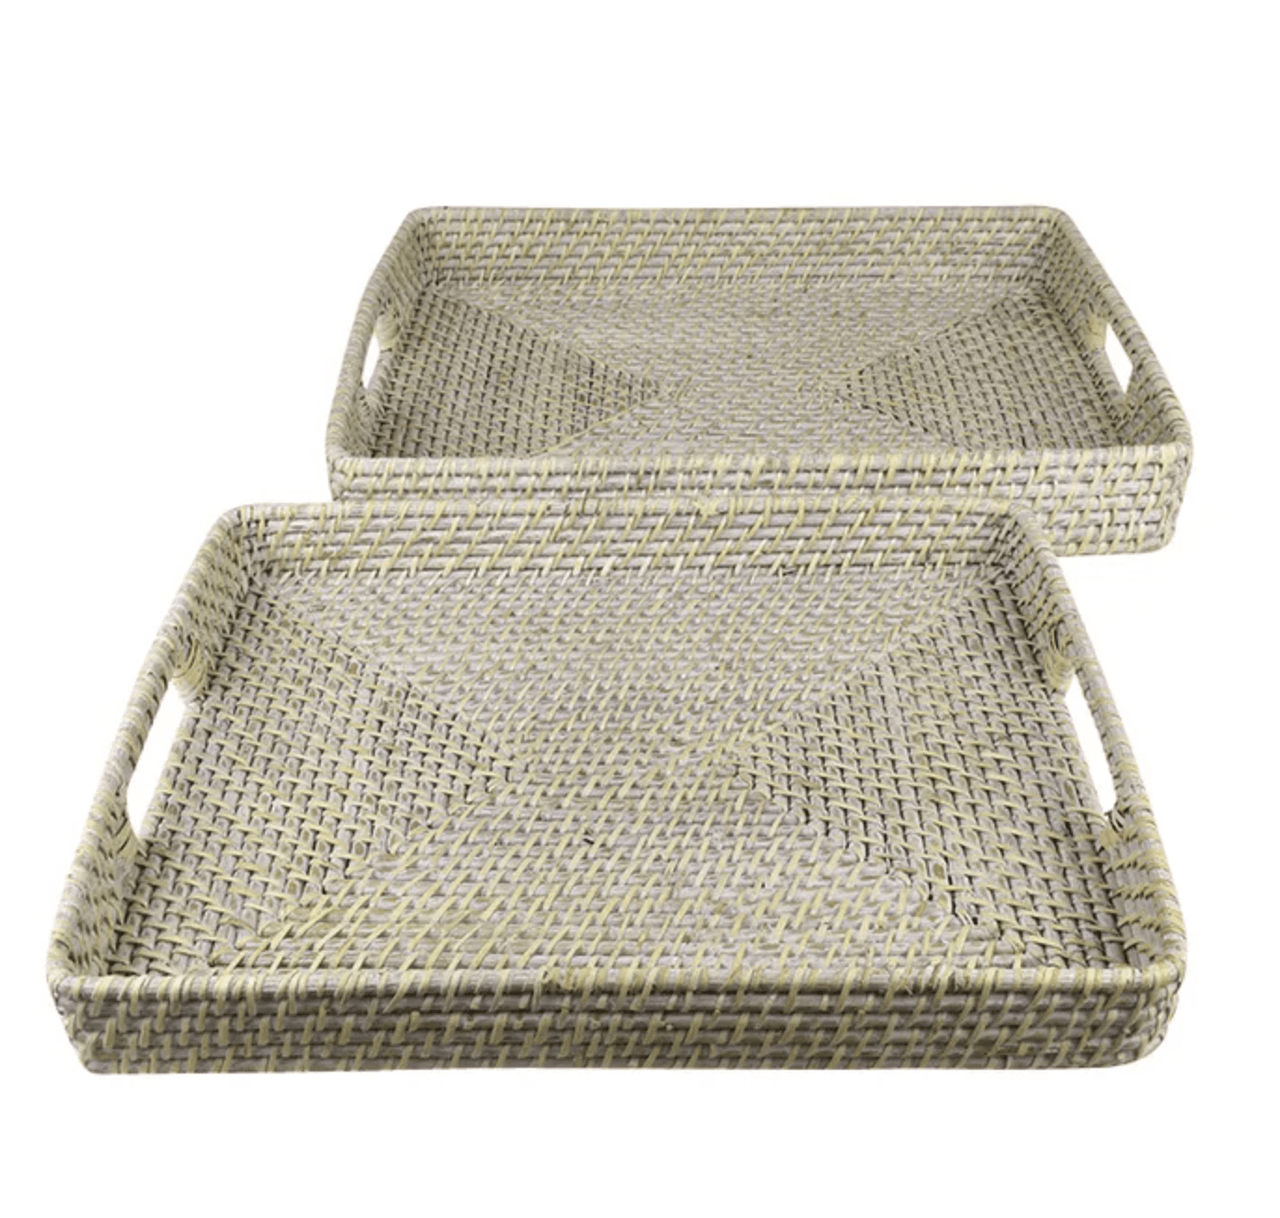 Bay Rattan Rectangular Tray - Small House of Dudley